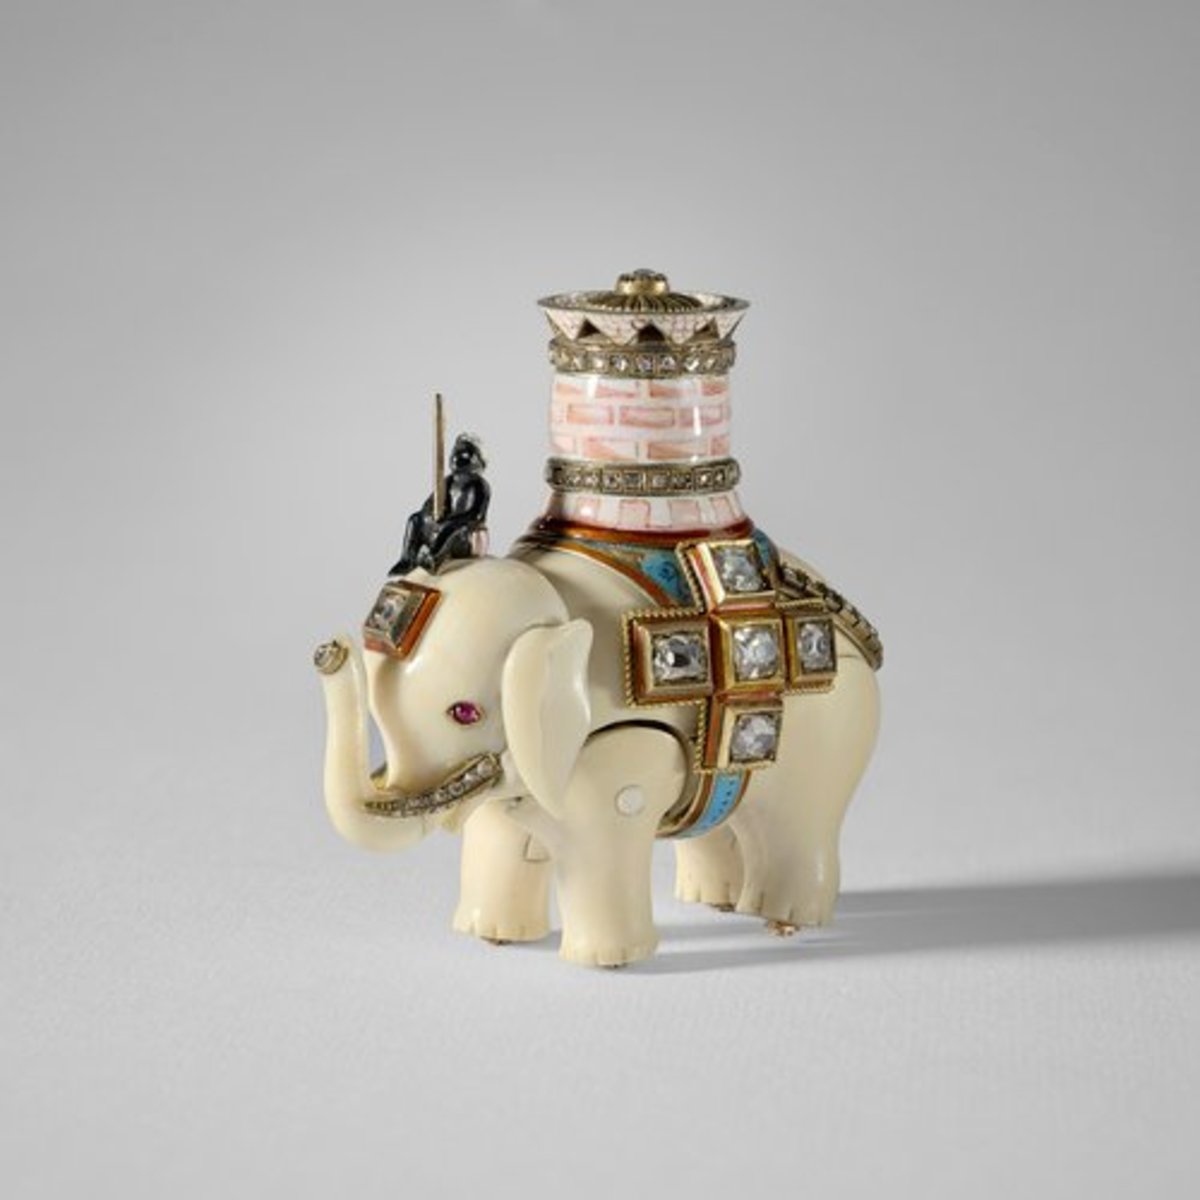 Mikhail Perkhin made this ivory elephant automaton in 1892; 2-1/2” x 2” x 1-1/2”. The elephant has separate, jointed body legs and head and is ridden by an enamel man sitting on its head and carrying a pink and white enamel castle with two rose-cut diamond set bands and a pierced upper rim; the top set with a single diamond in gold. This automaton was made as the “surprise” for the Diamond Trellis Egg, made by Carl Fabergé for Tsar Alexander III. The Tsar presented the egg to his wife, Tsarina Maria Feodorovna, for Easter 1892. The elephant is wound with a watch key through a hole hidden underneath the diamond cross on one side of the elephant. It walks on ratcheted wheels and lifts its head up and down. You can learn more and watch a short video about this piece here.